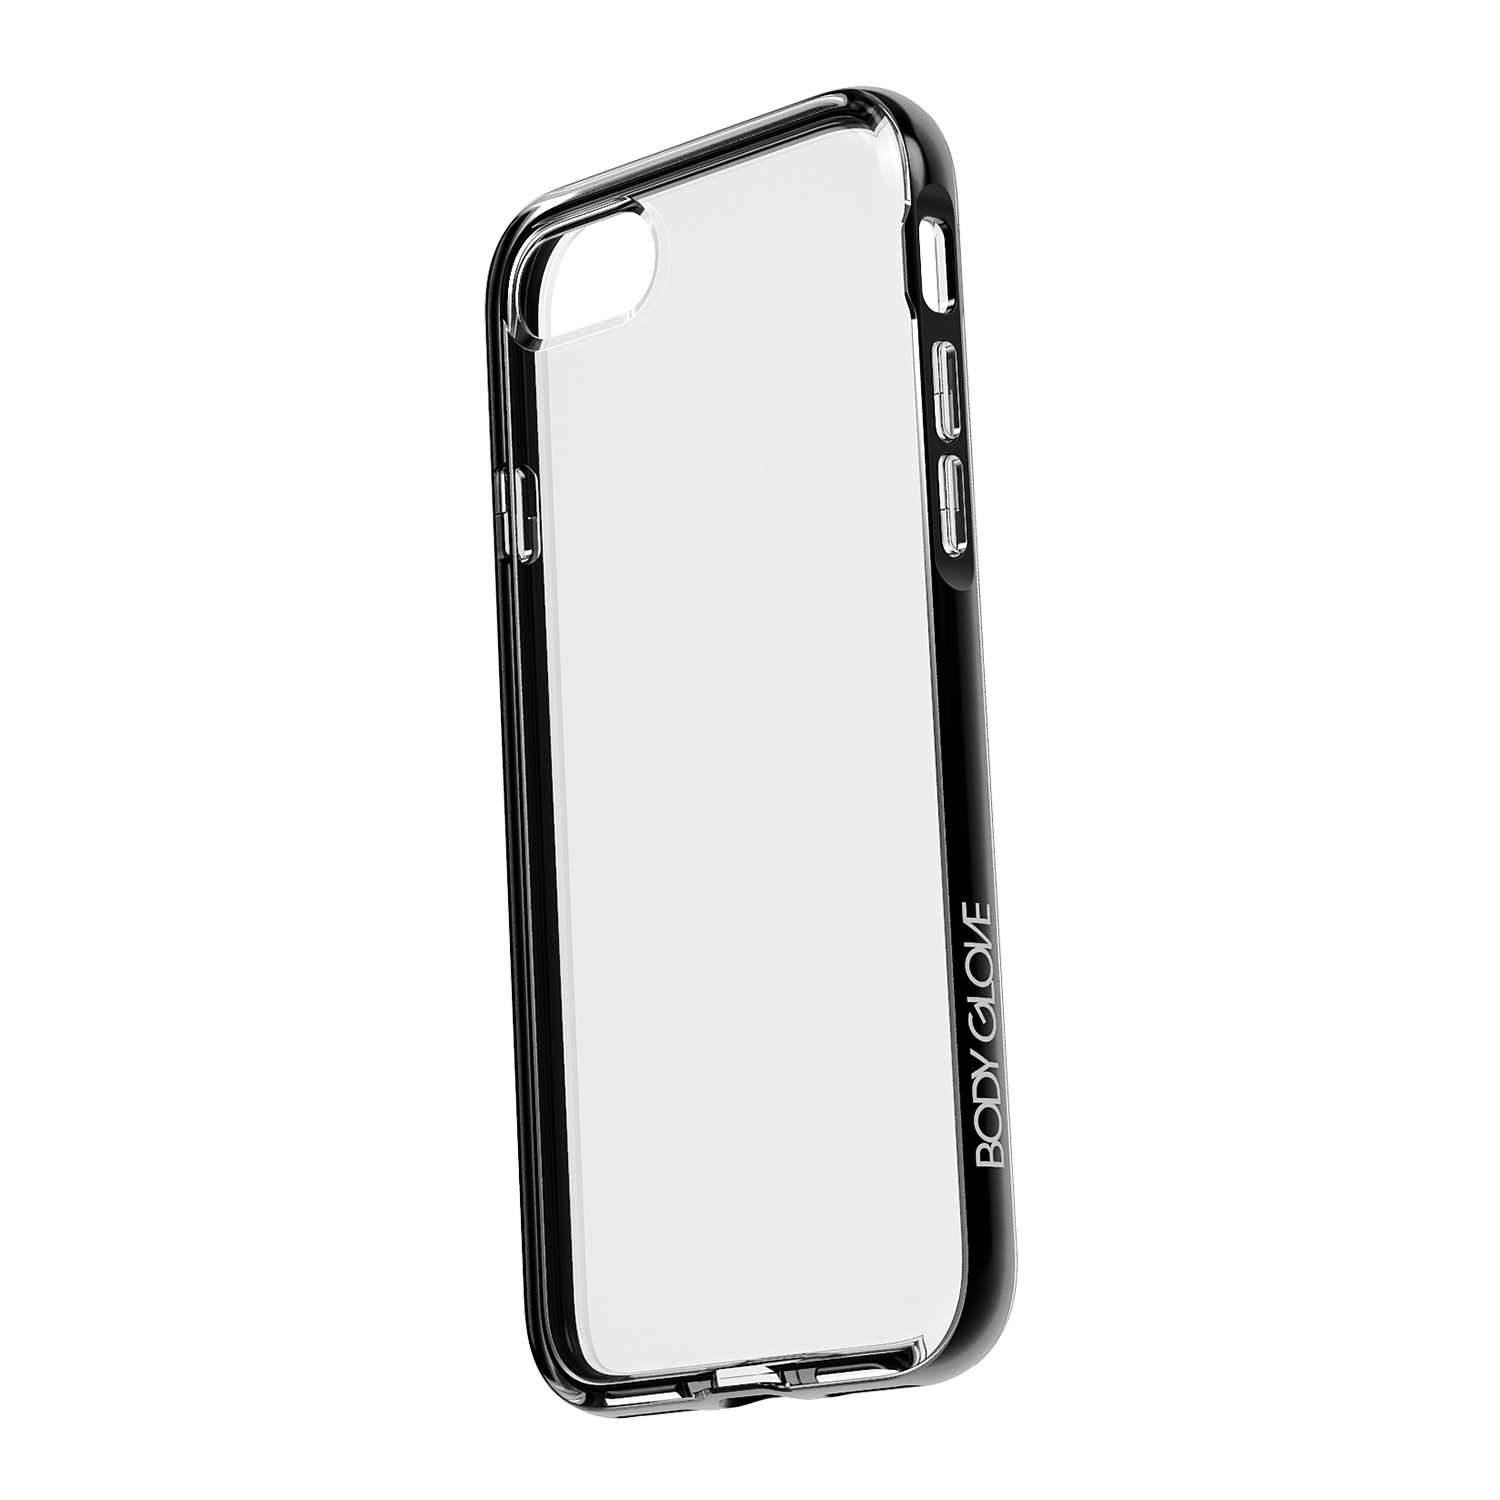 Body Glove Clownfish Aluminium Case for Galaxy S6 – Clear and Back